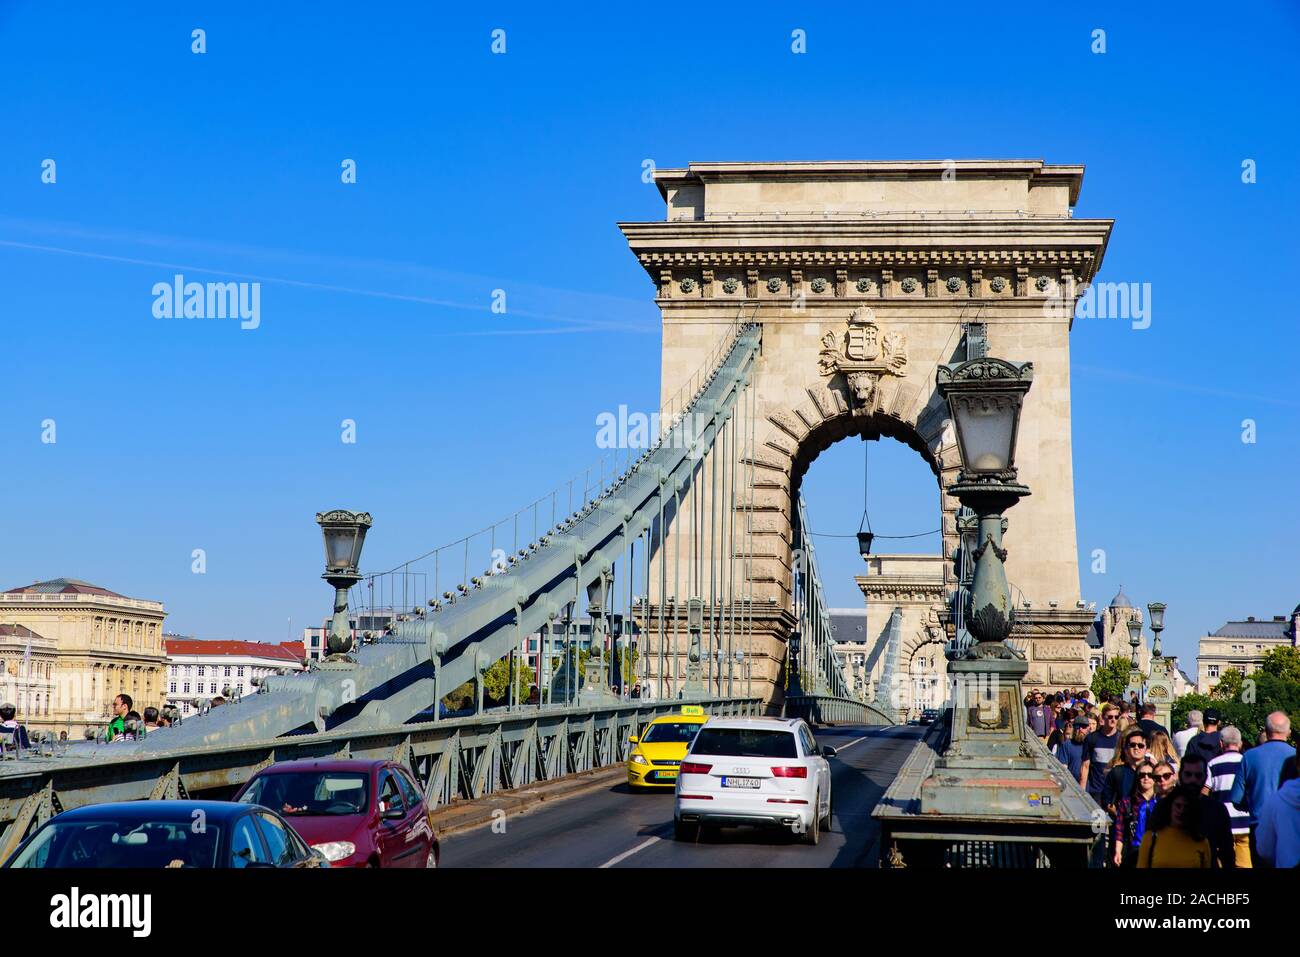 Széchenyi Chain Bridge across the River Danube connecting Buda and Pest, Budapest, Hungary Stock Photo